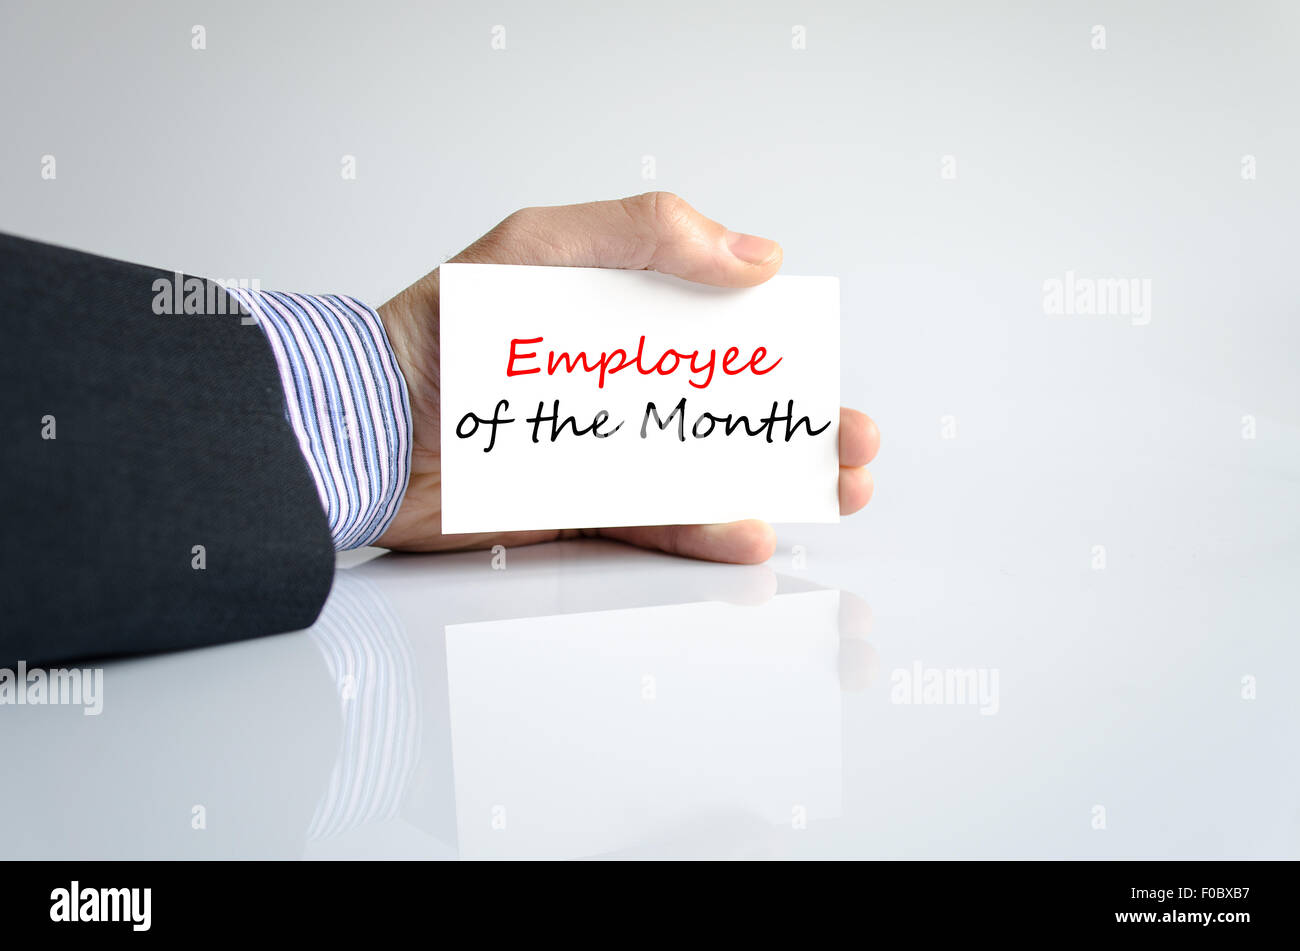 Employee of the month text concept isolated over white background Stock Photo